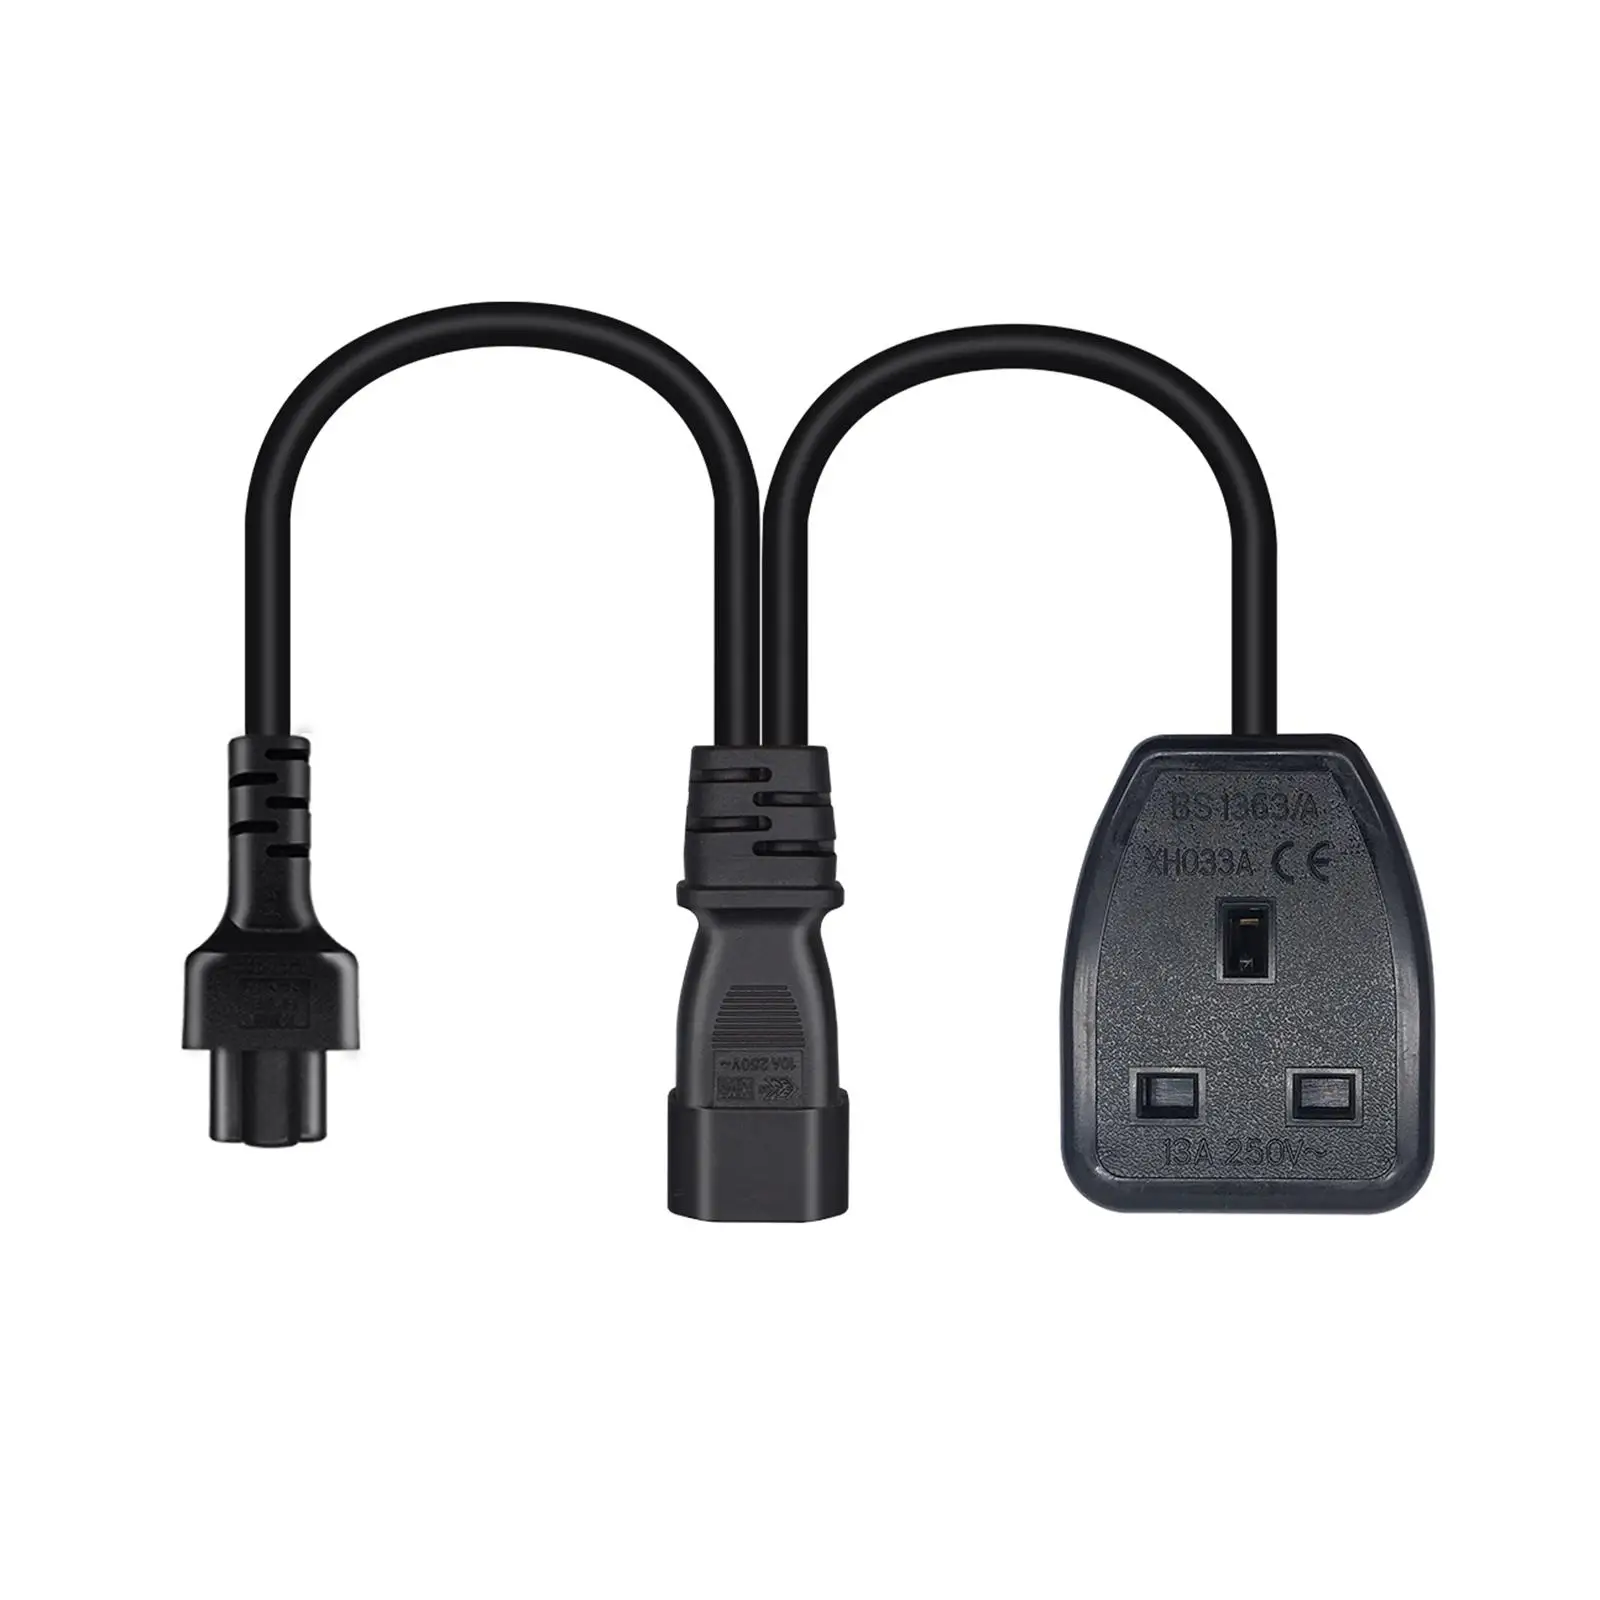 Y Splitter Power Cord C14 to  + UK 250V 2500W 0.32M 1ft Male to Female Black Adapter Cable Connector